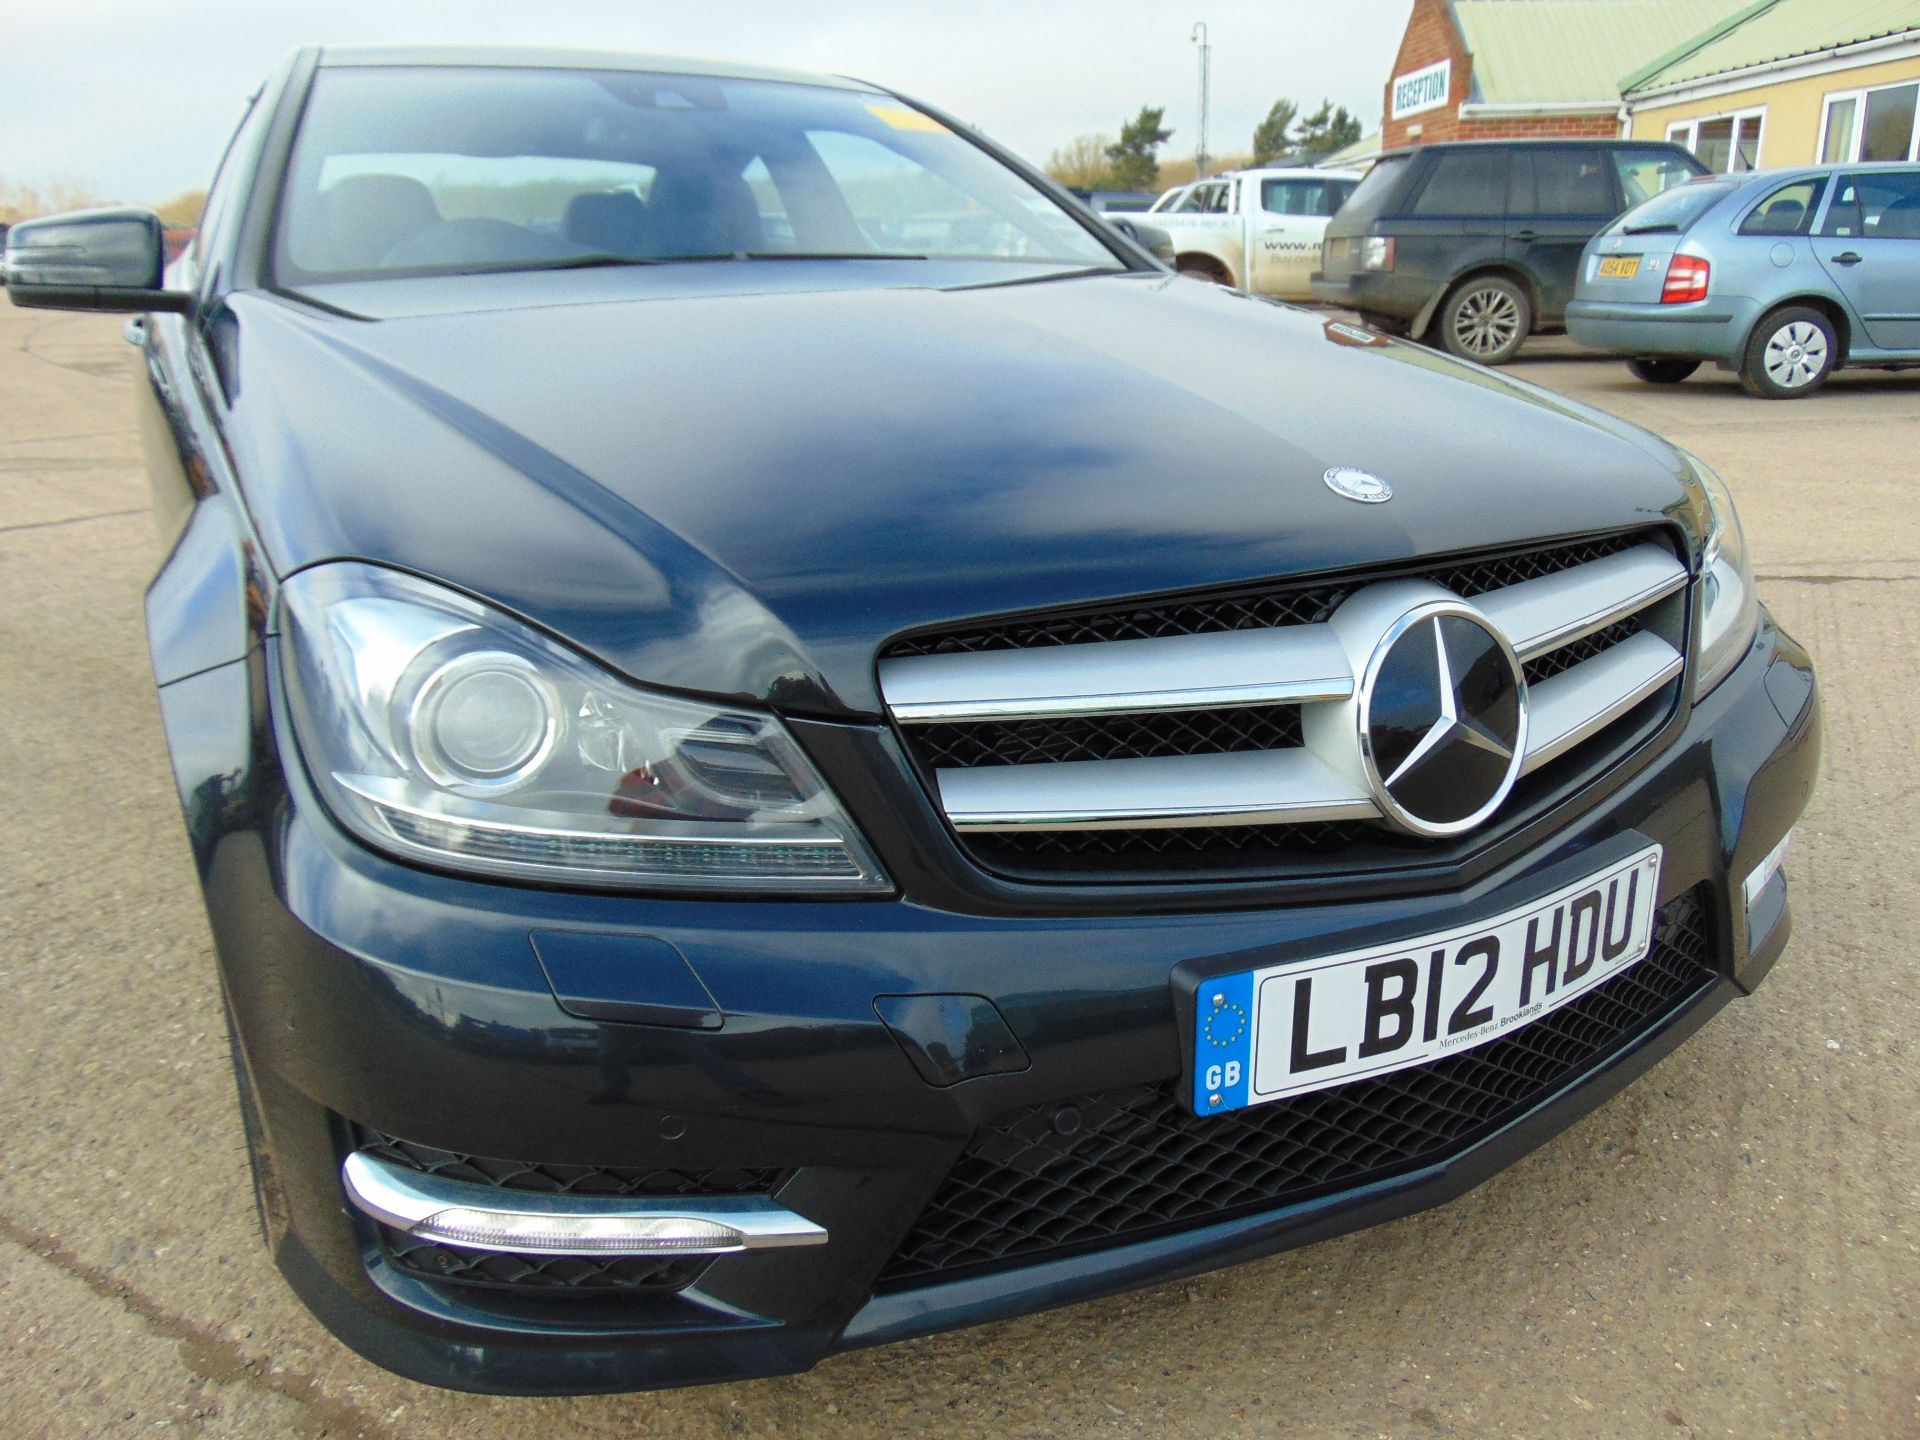 2012 Mercedes-Benz C Class 2.1 C250 CDI BlueEFFICIENCY AMG Sport 4dr Auto ONLY 7,860 miles!!! - Image 9 of 29